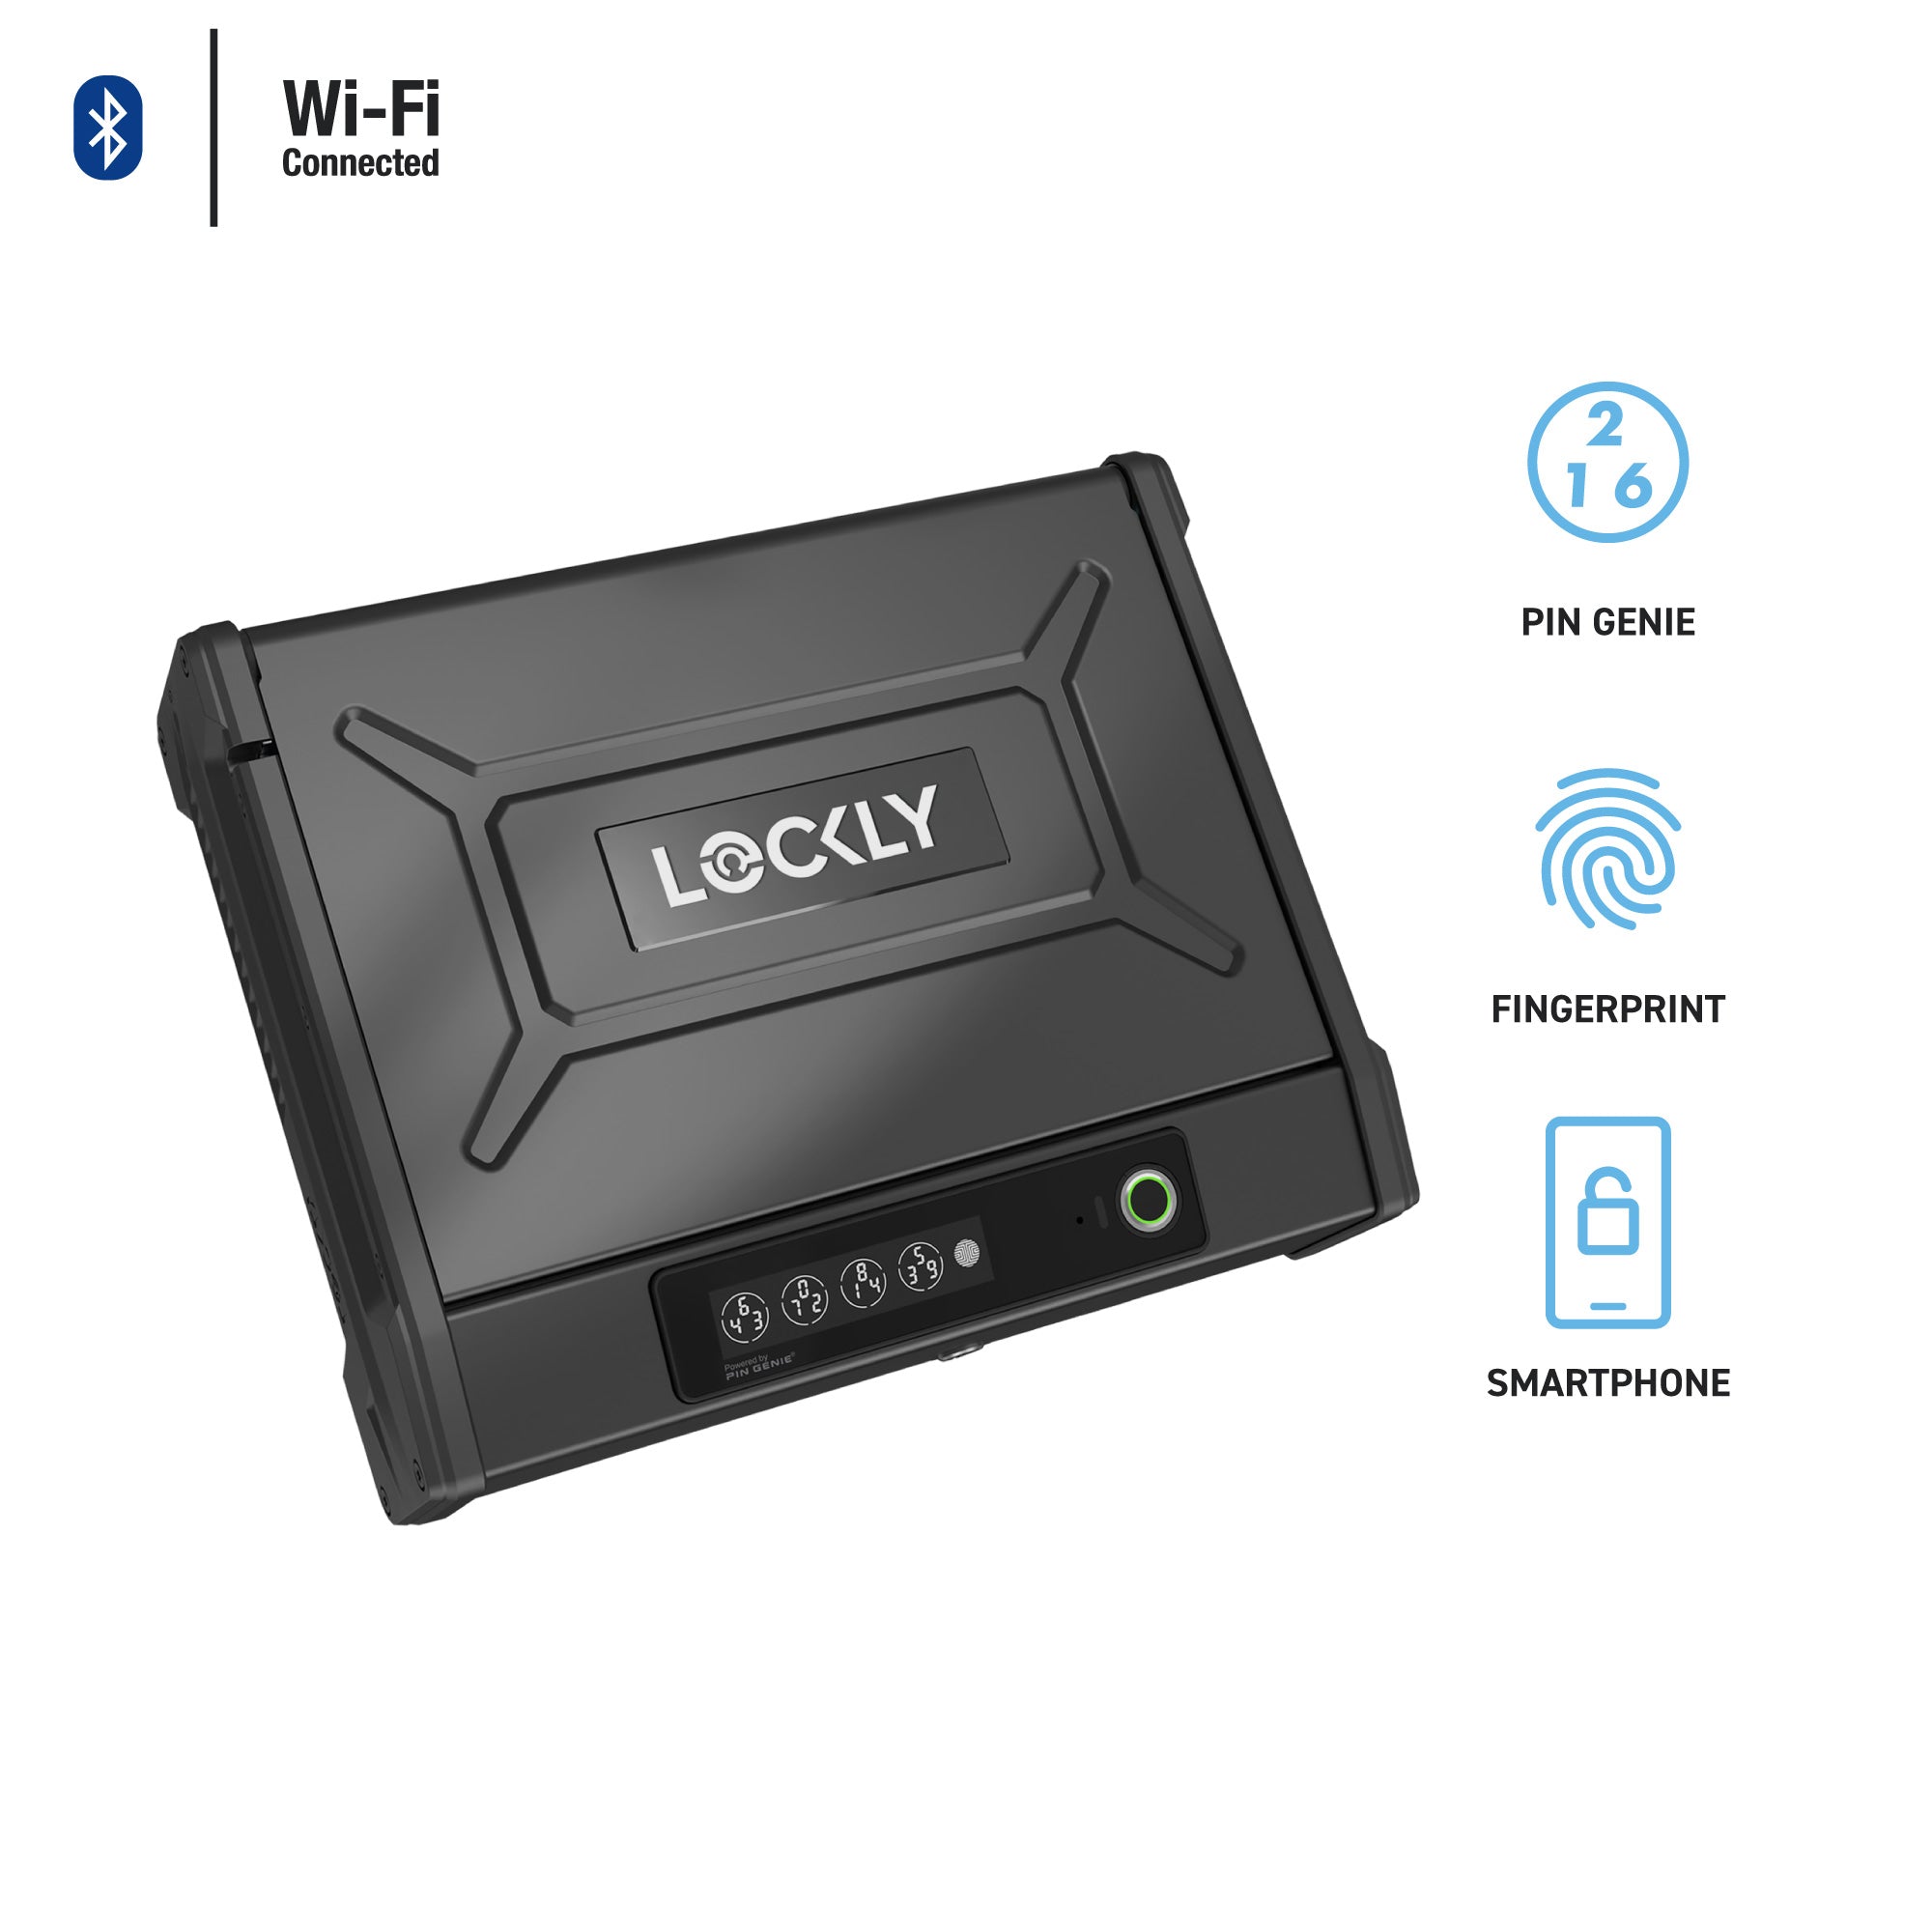 Lockly Smart Lock with text showing its features